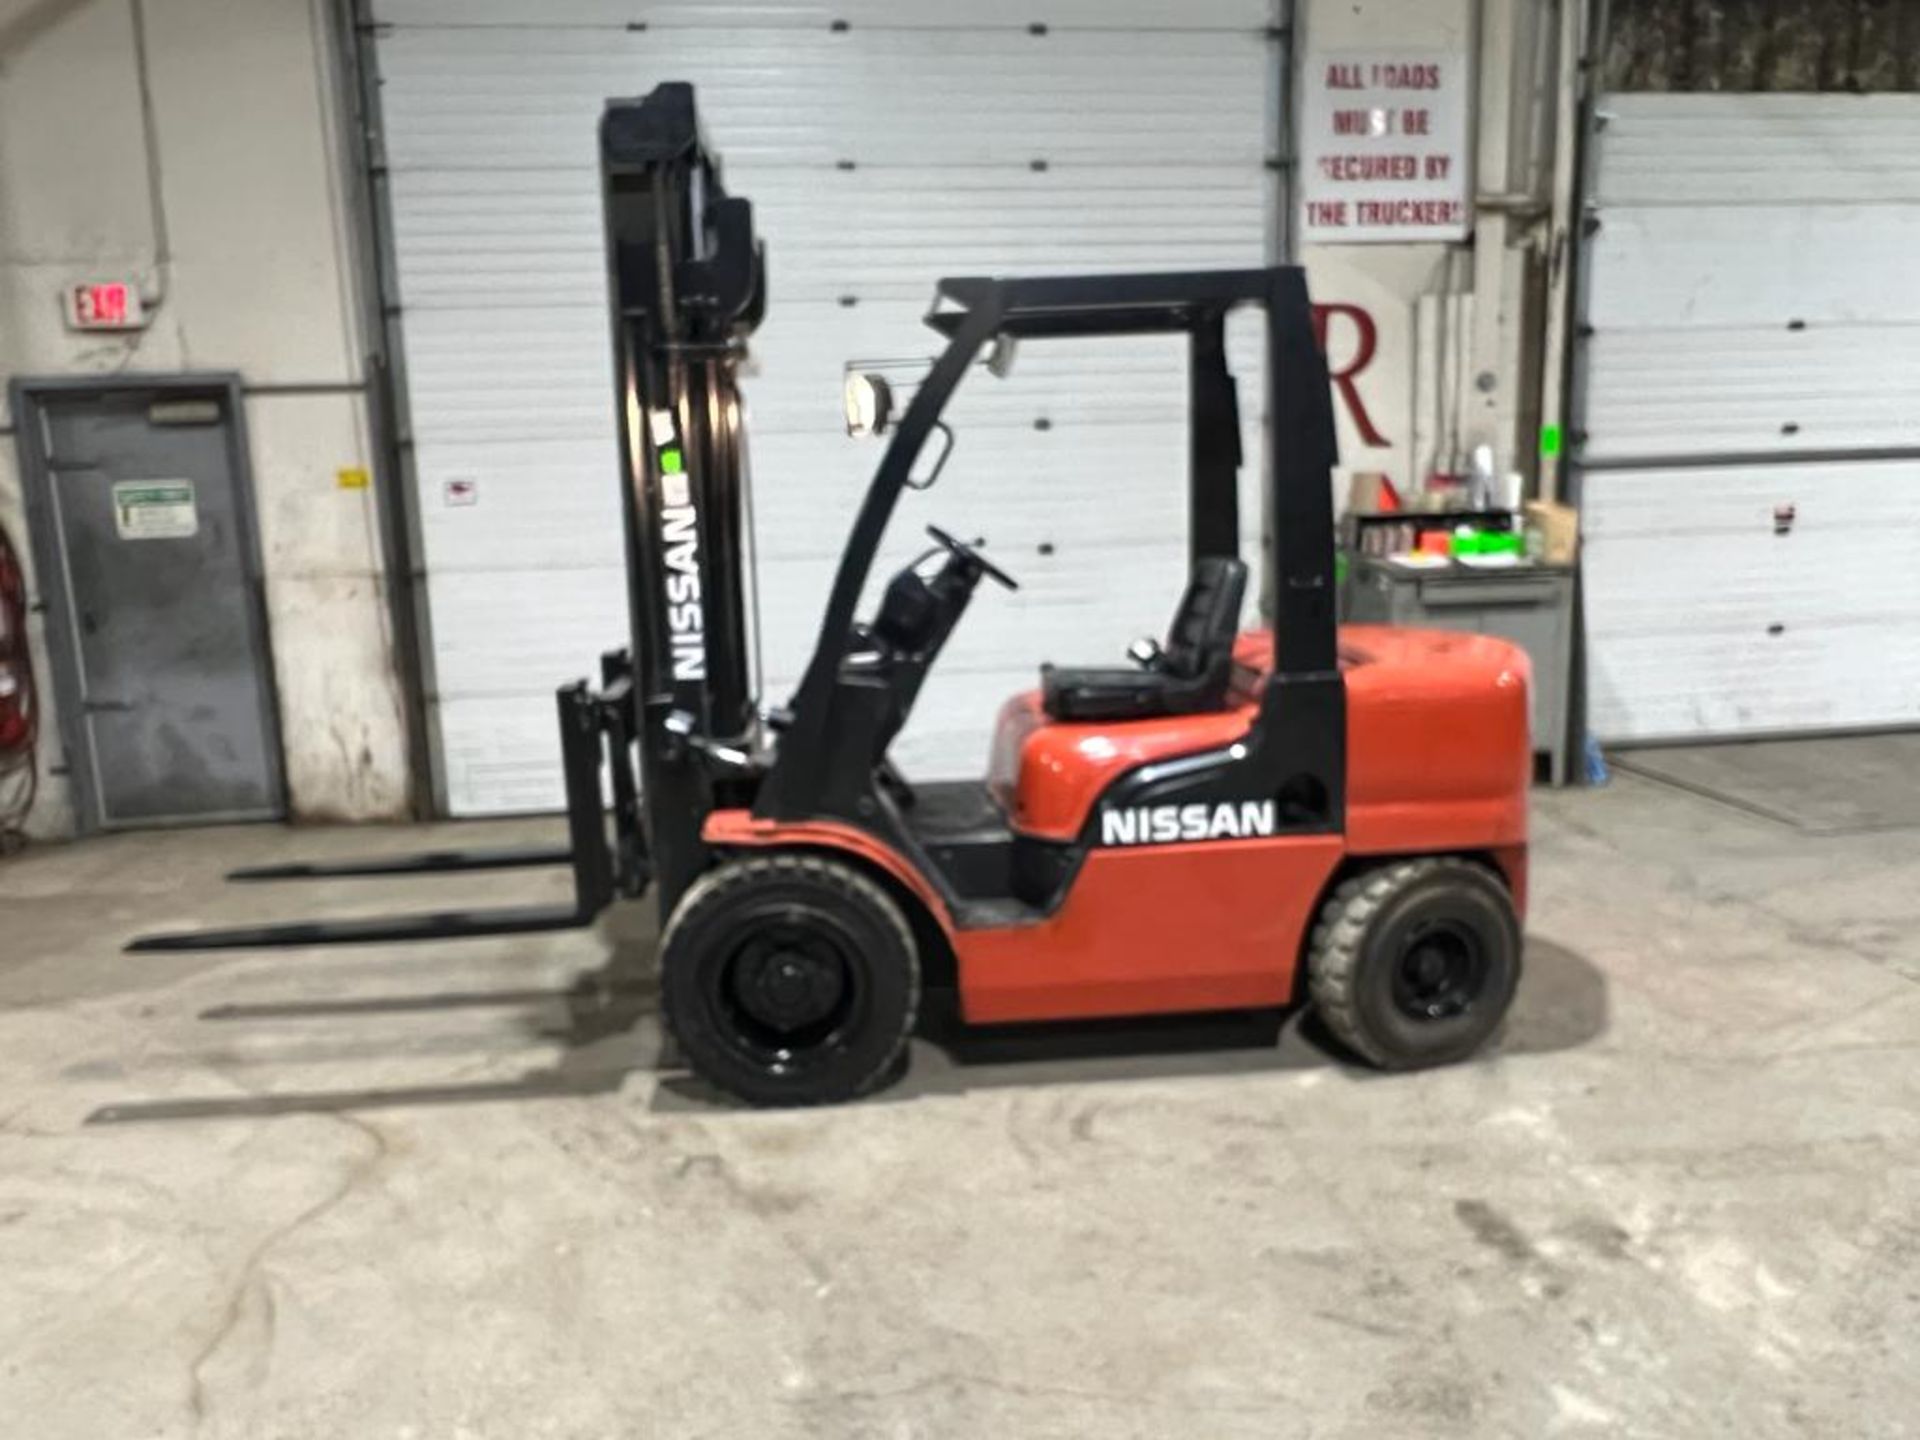 NICE Nissan 6,000lbs Capacity OUTDOOR Forklift Diesel with Sideshift and Low Hours - FREE CUSTOMS